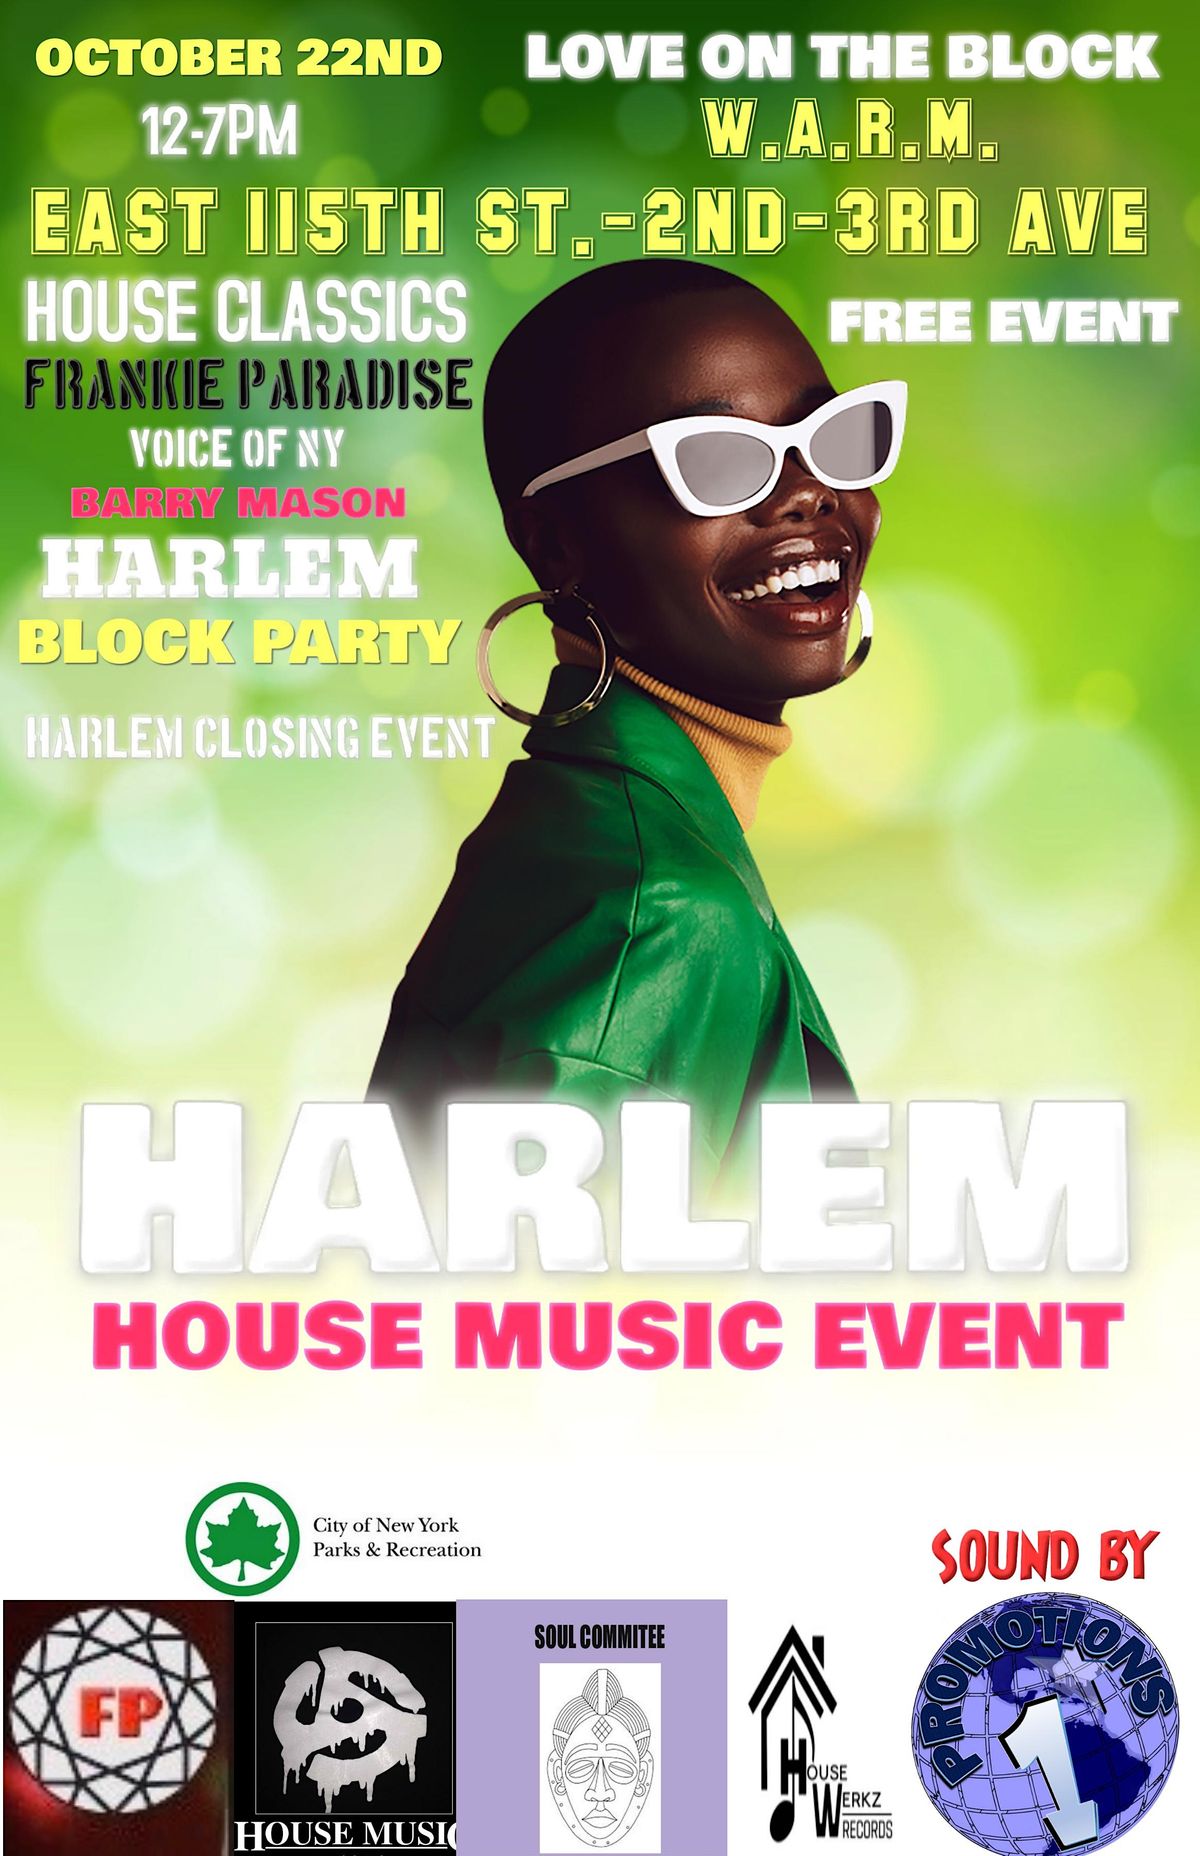 FREE HARLEM ALL AGES BLOCK PARTY WARM LOVE ON THE BLOCK DJ FRANKIE PARADISE